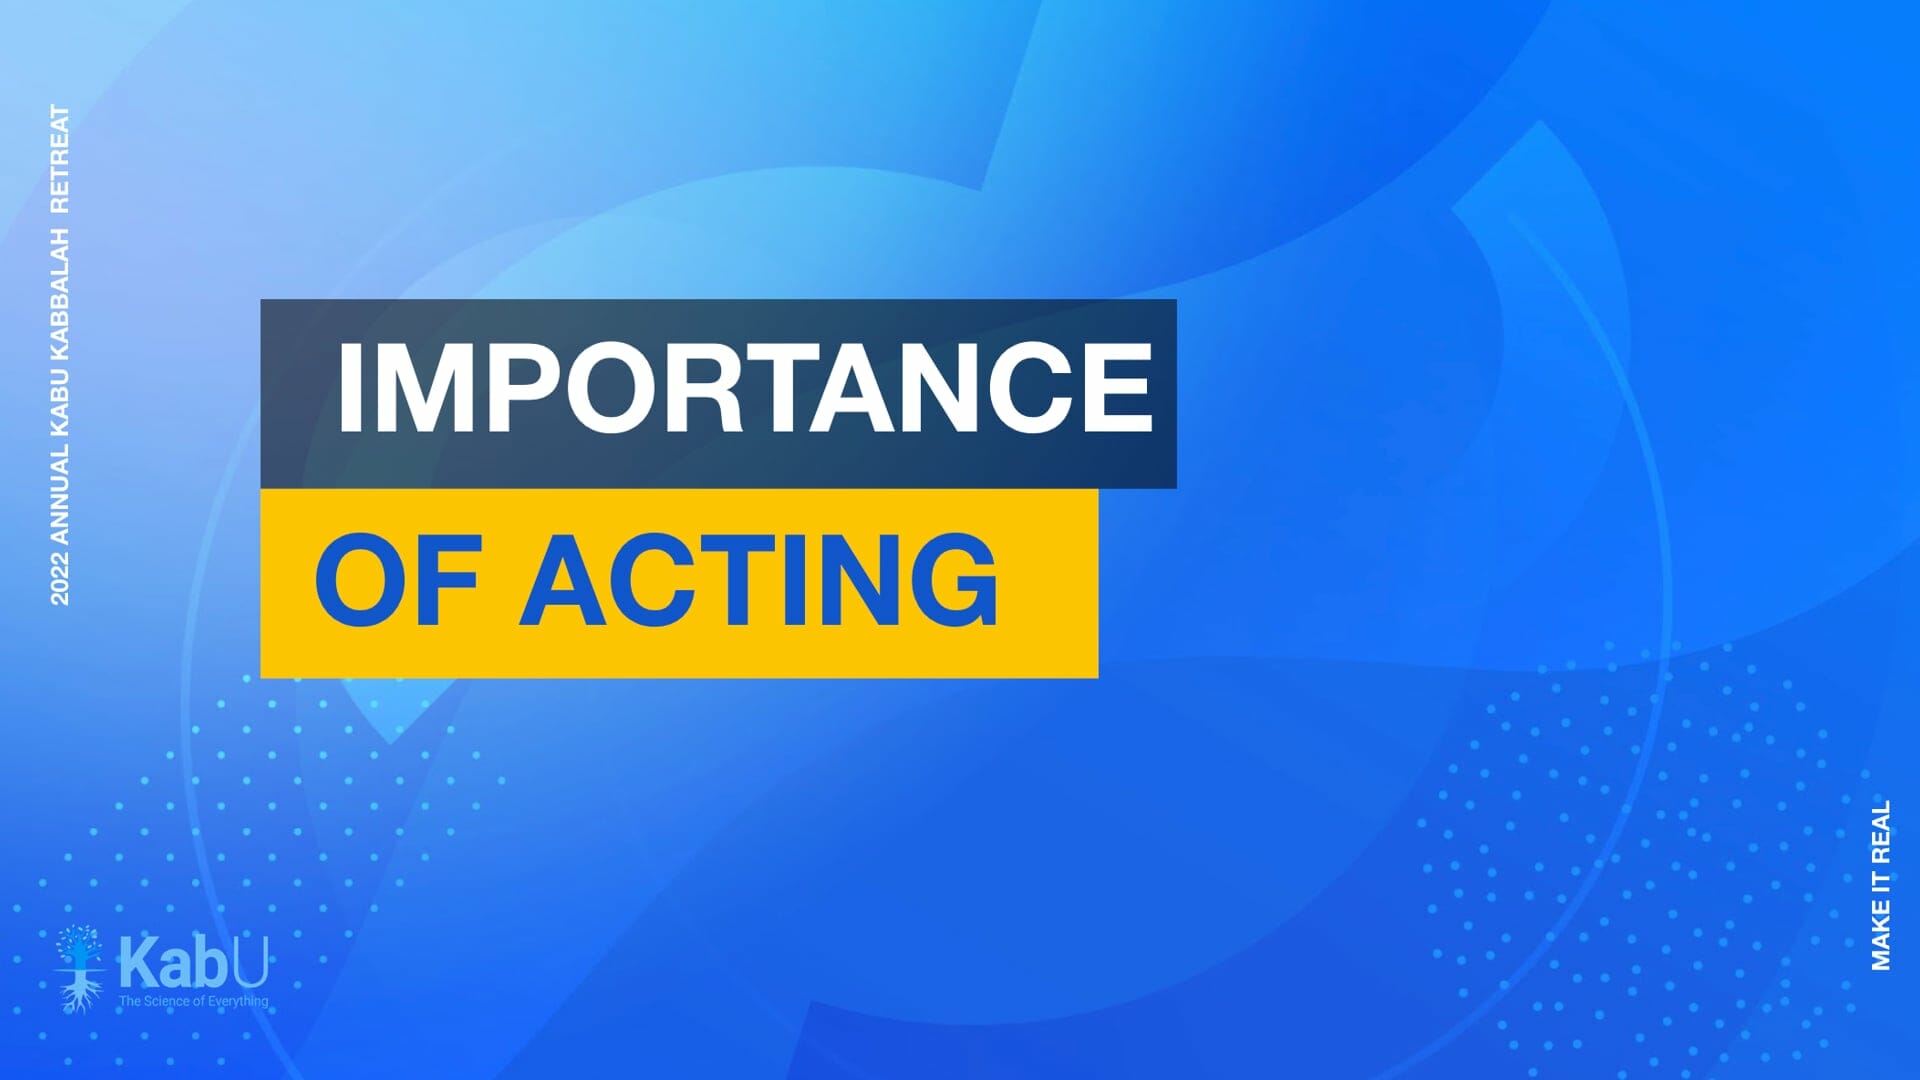 Sept 10, 2022 – Importance Of Acting